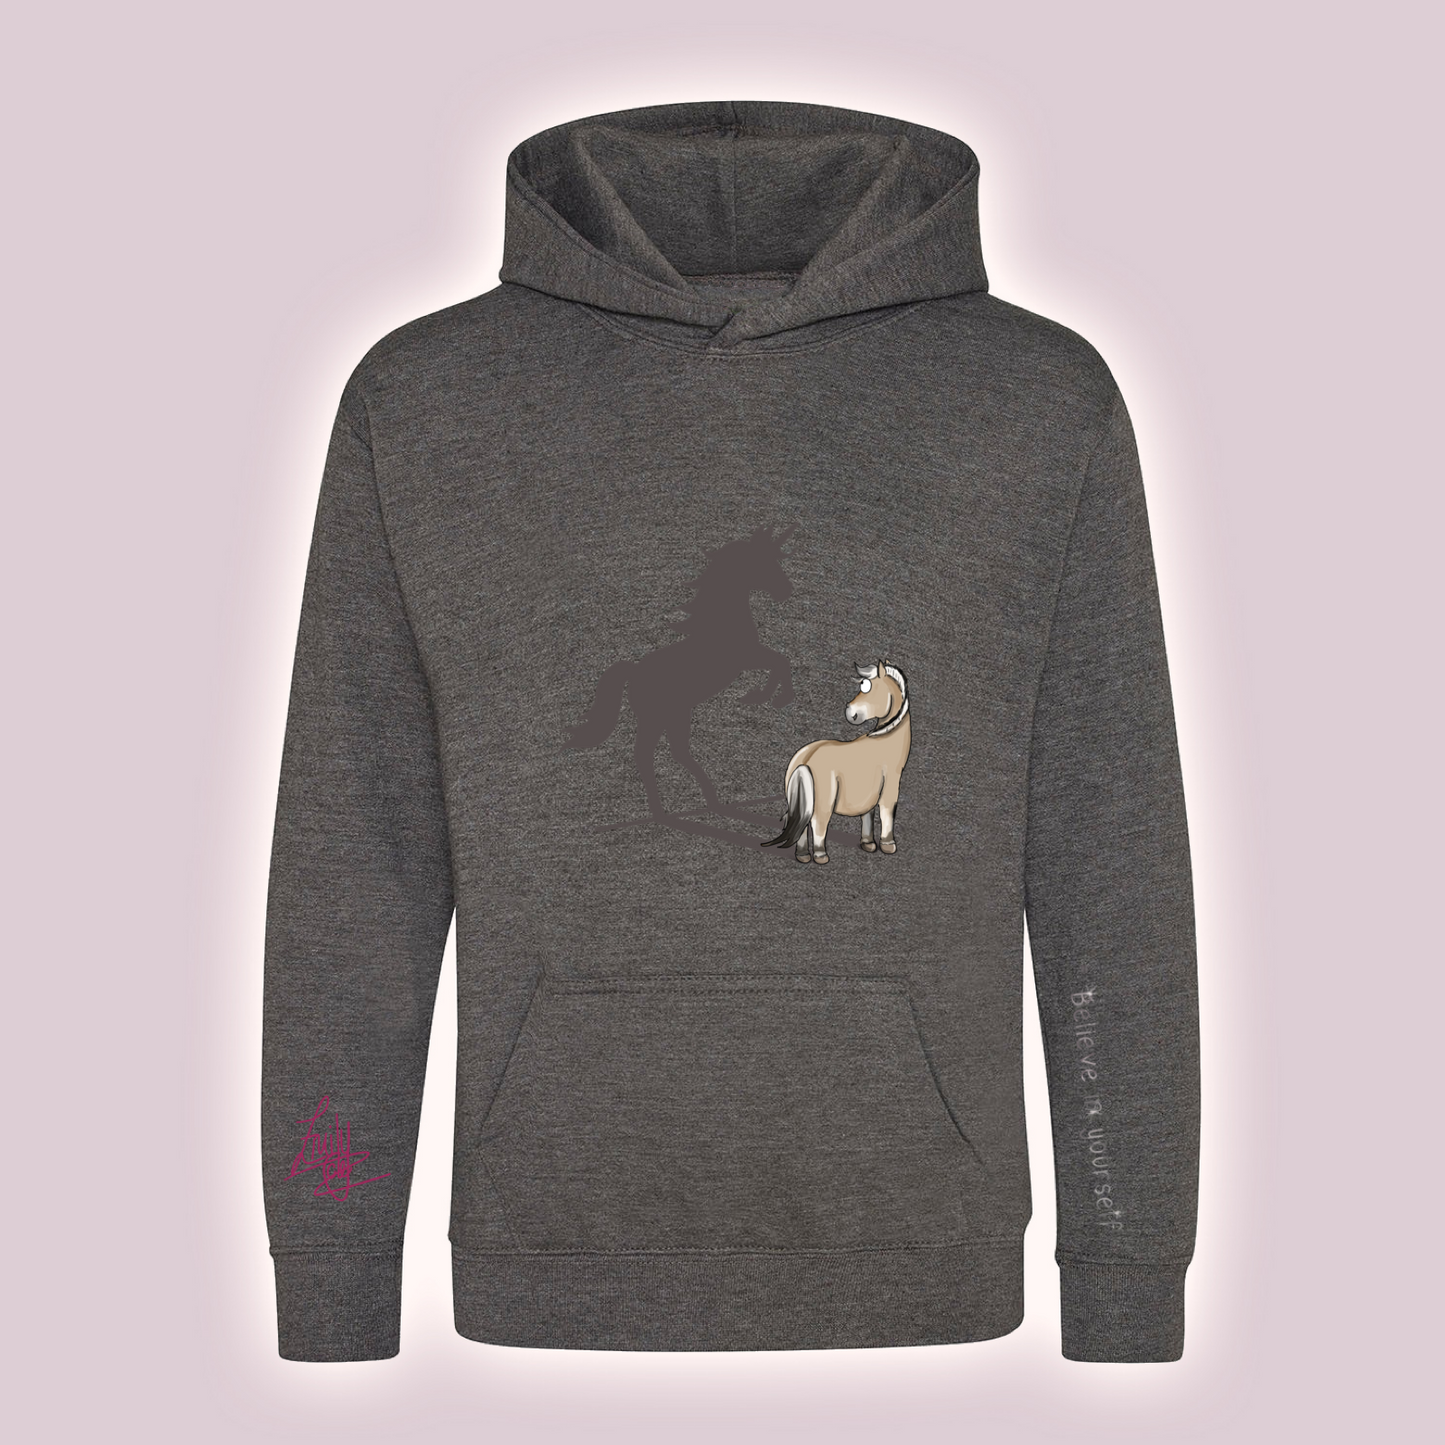 Equiboodle Emily Cole Kids Cub Hoodie -  Fjord Believe In Yourself